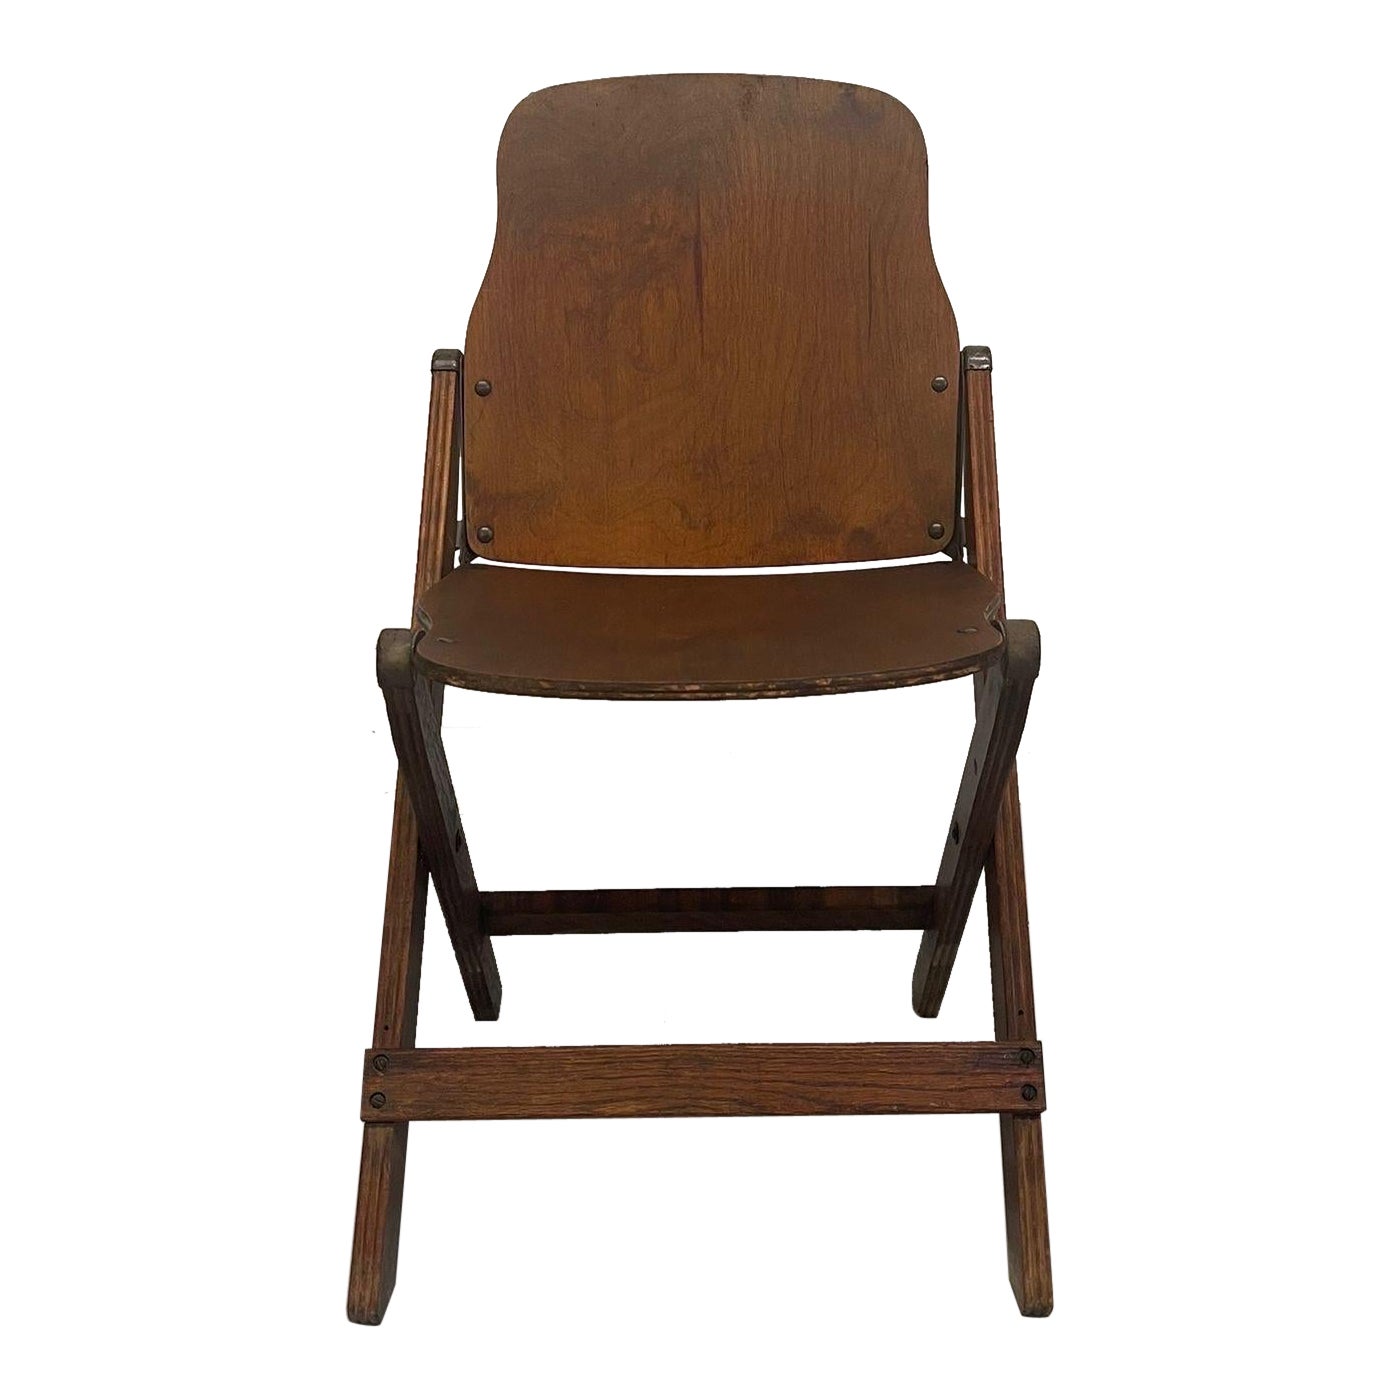 Vintage American Seating Company Folding Chair